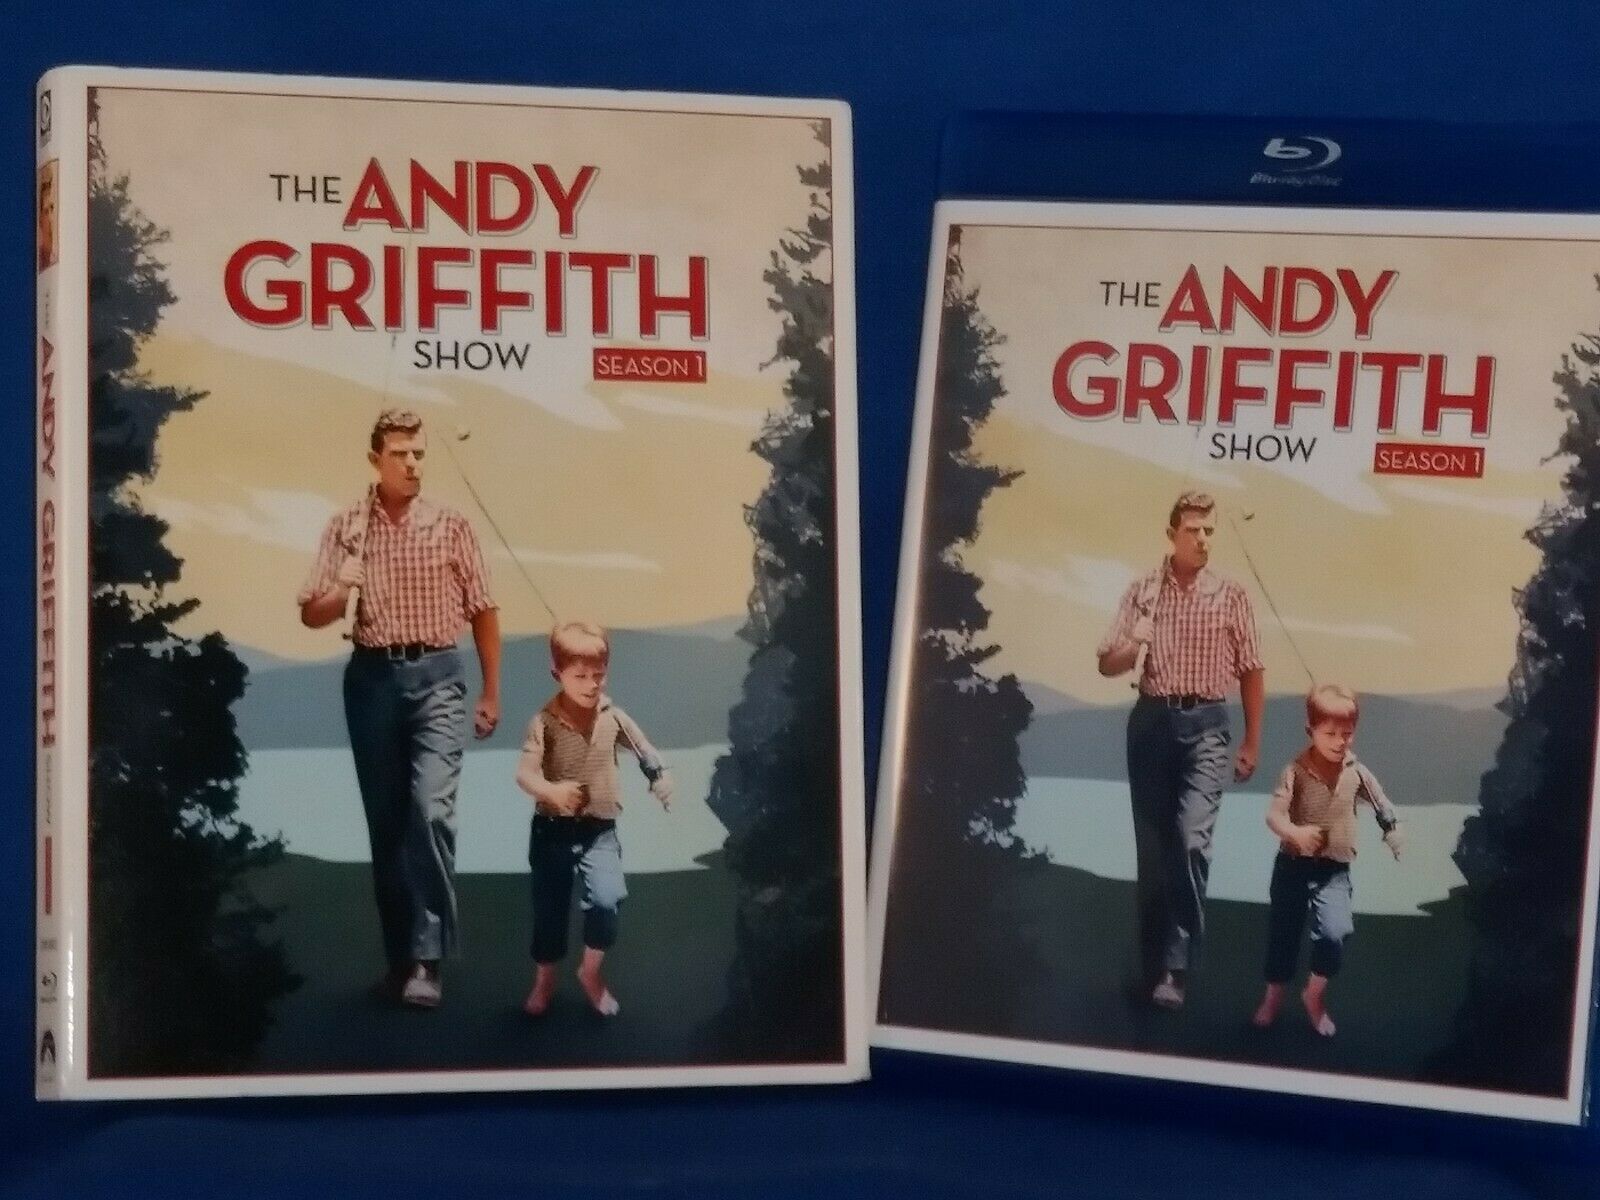 ANDY GRIFFITH DON KNOTTS The Andy Griffith Show Season 1 Blu-ray 4 disc set - $11.87